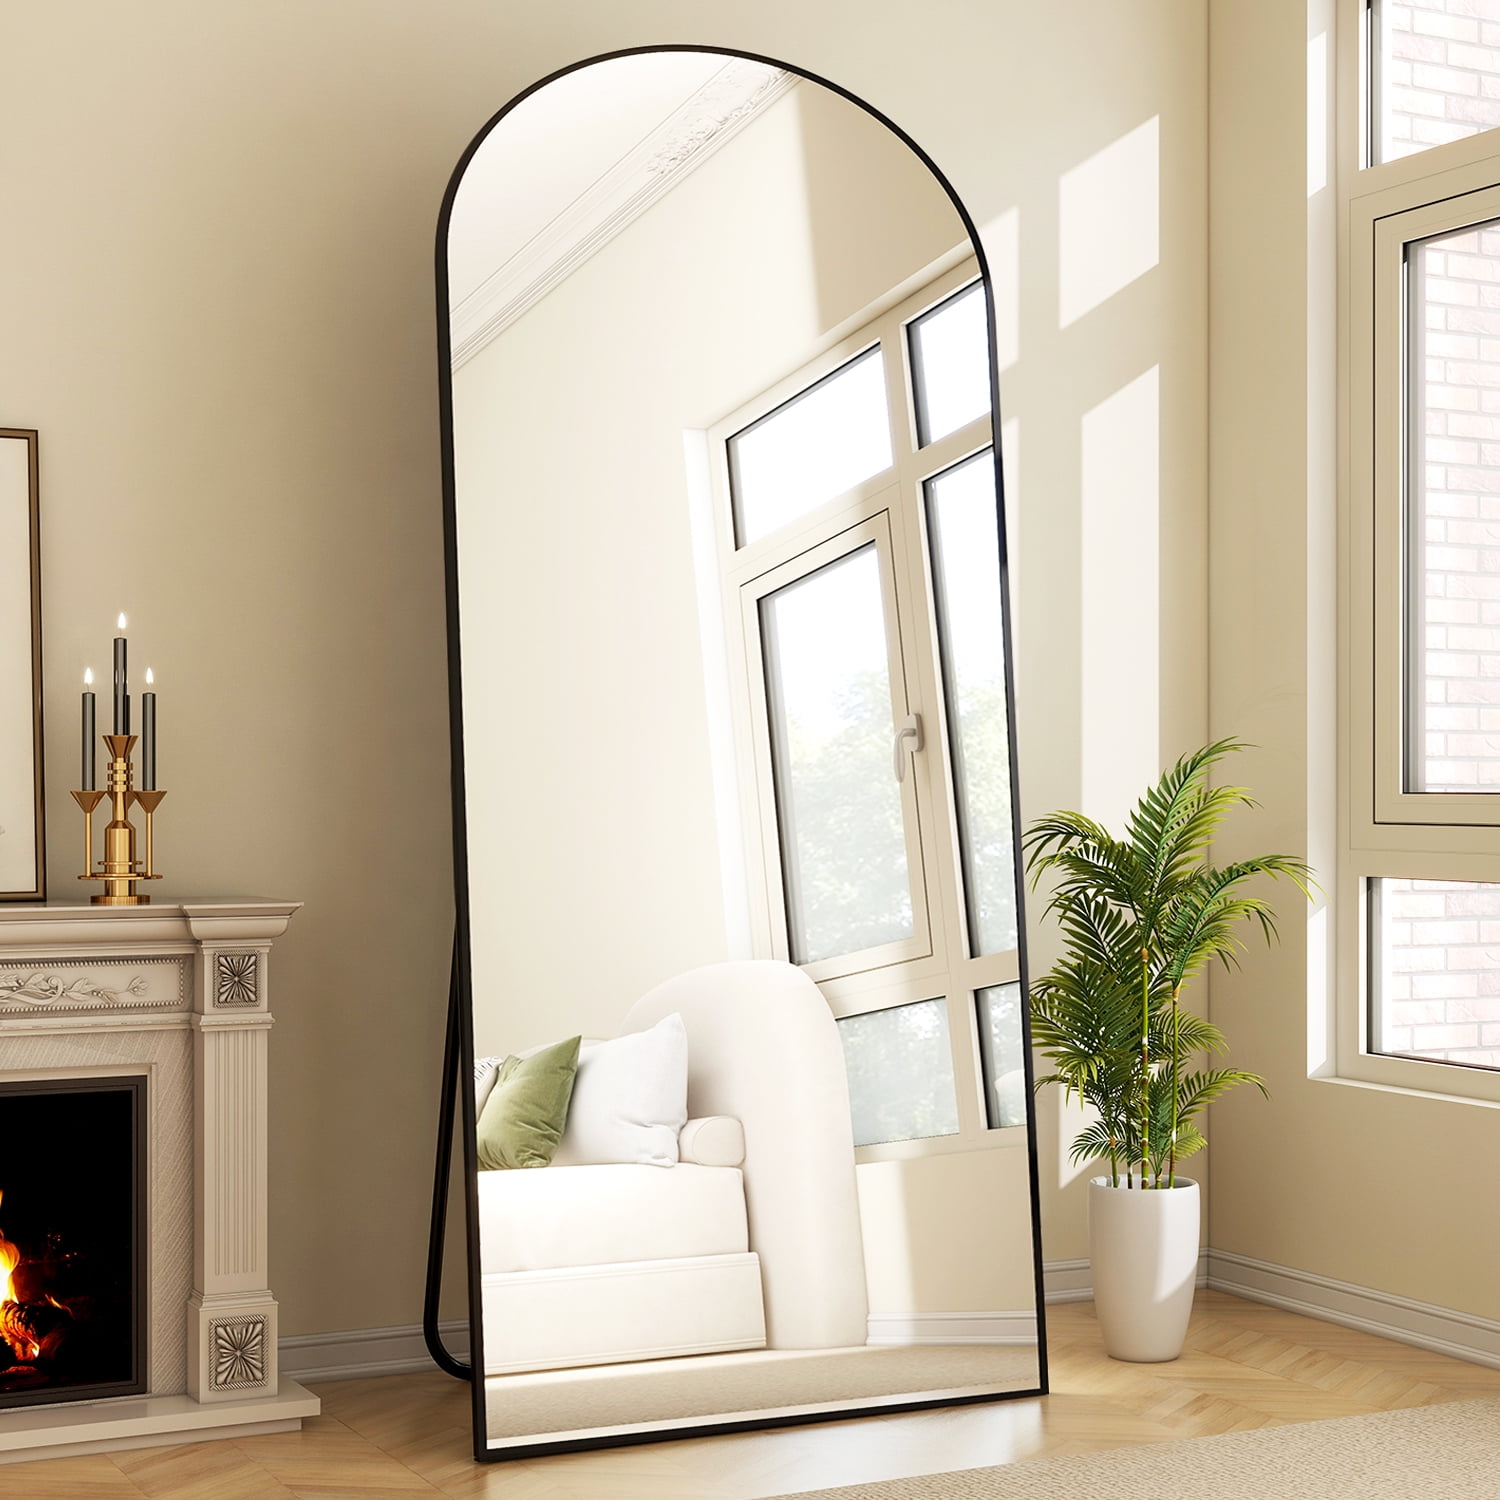 Ufurpie 71×32 Large Full Length Mirror,Arch Wall Mounted Mirror,Oversize  Floor Standing Mirror with Stand,for Bedroom Living Room Dressing